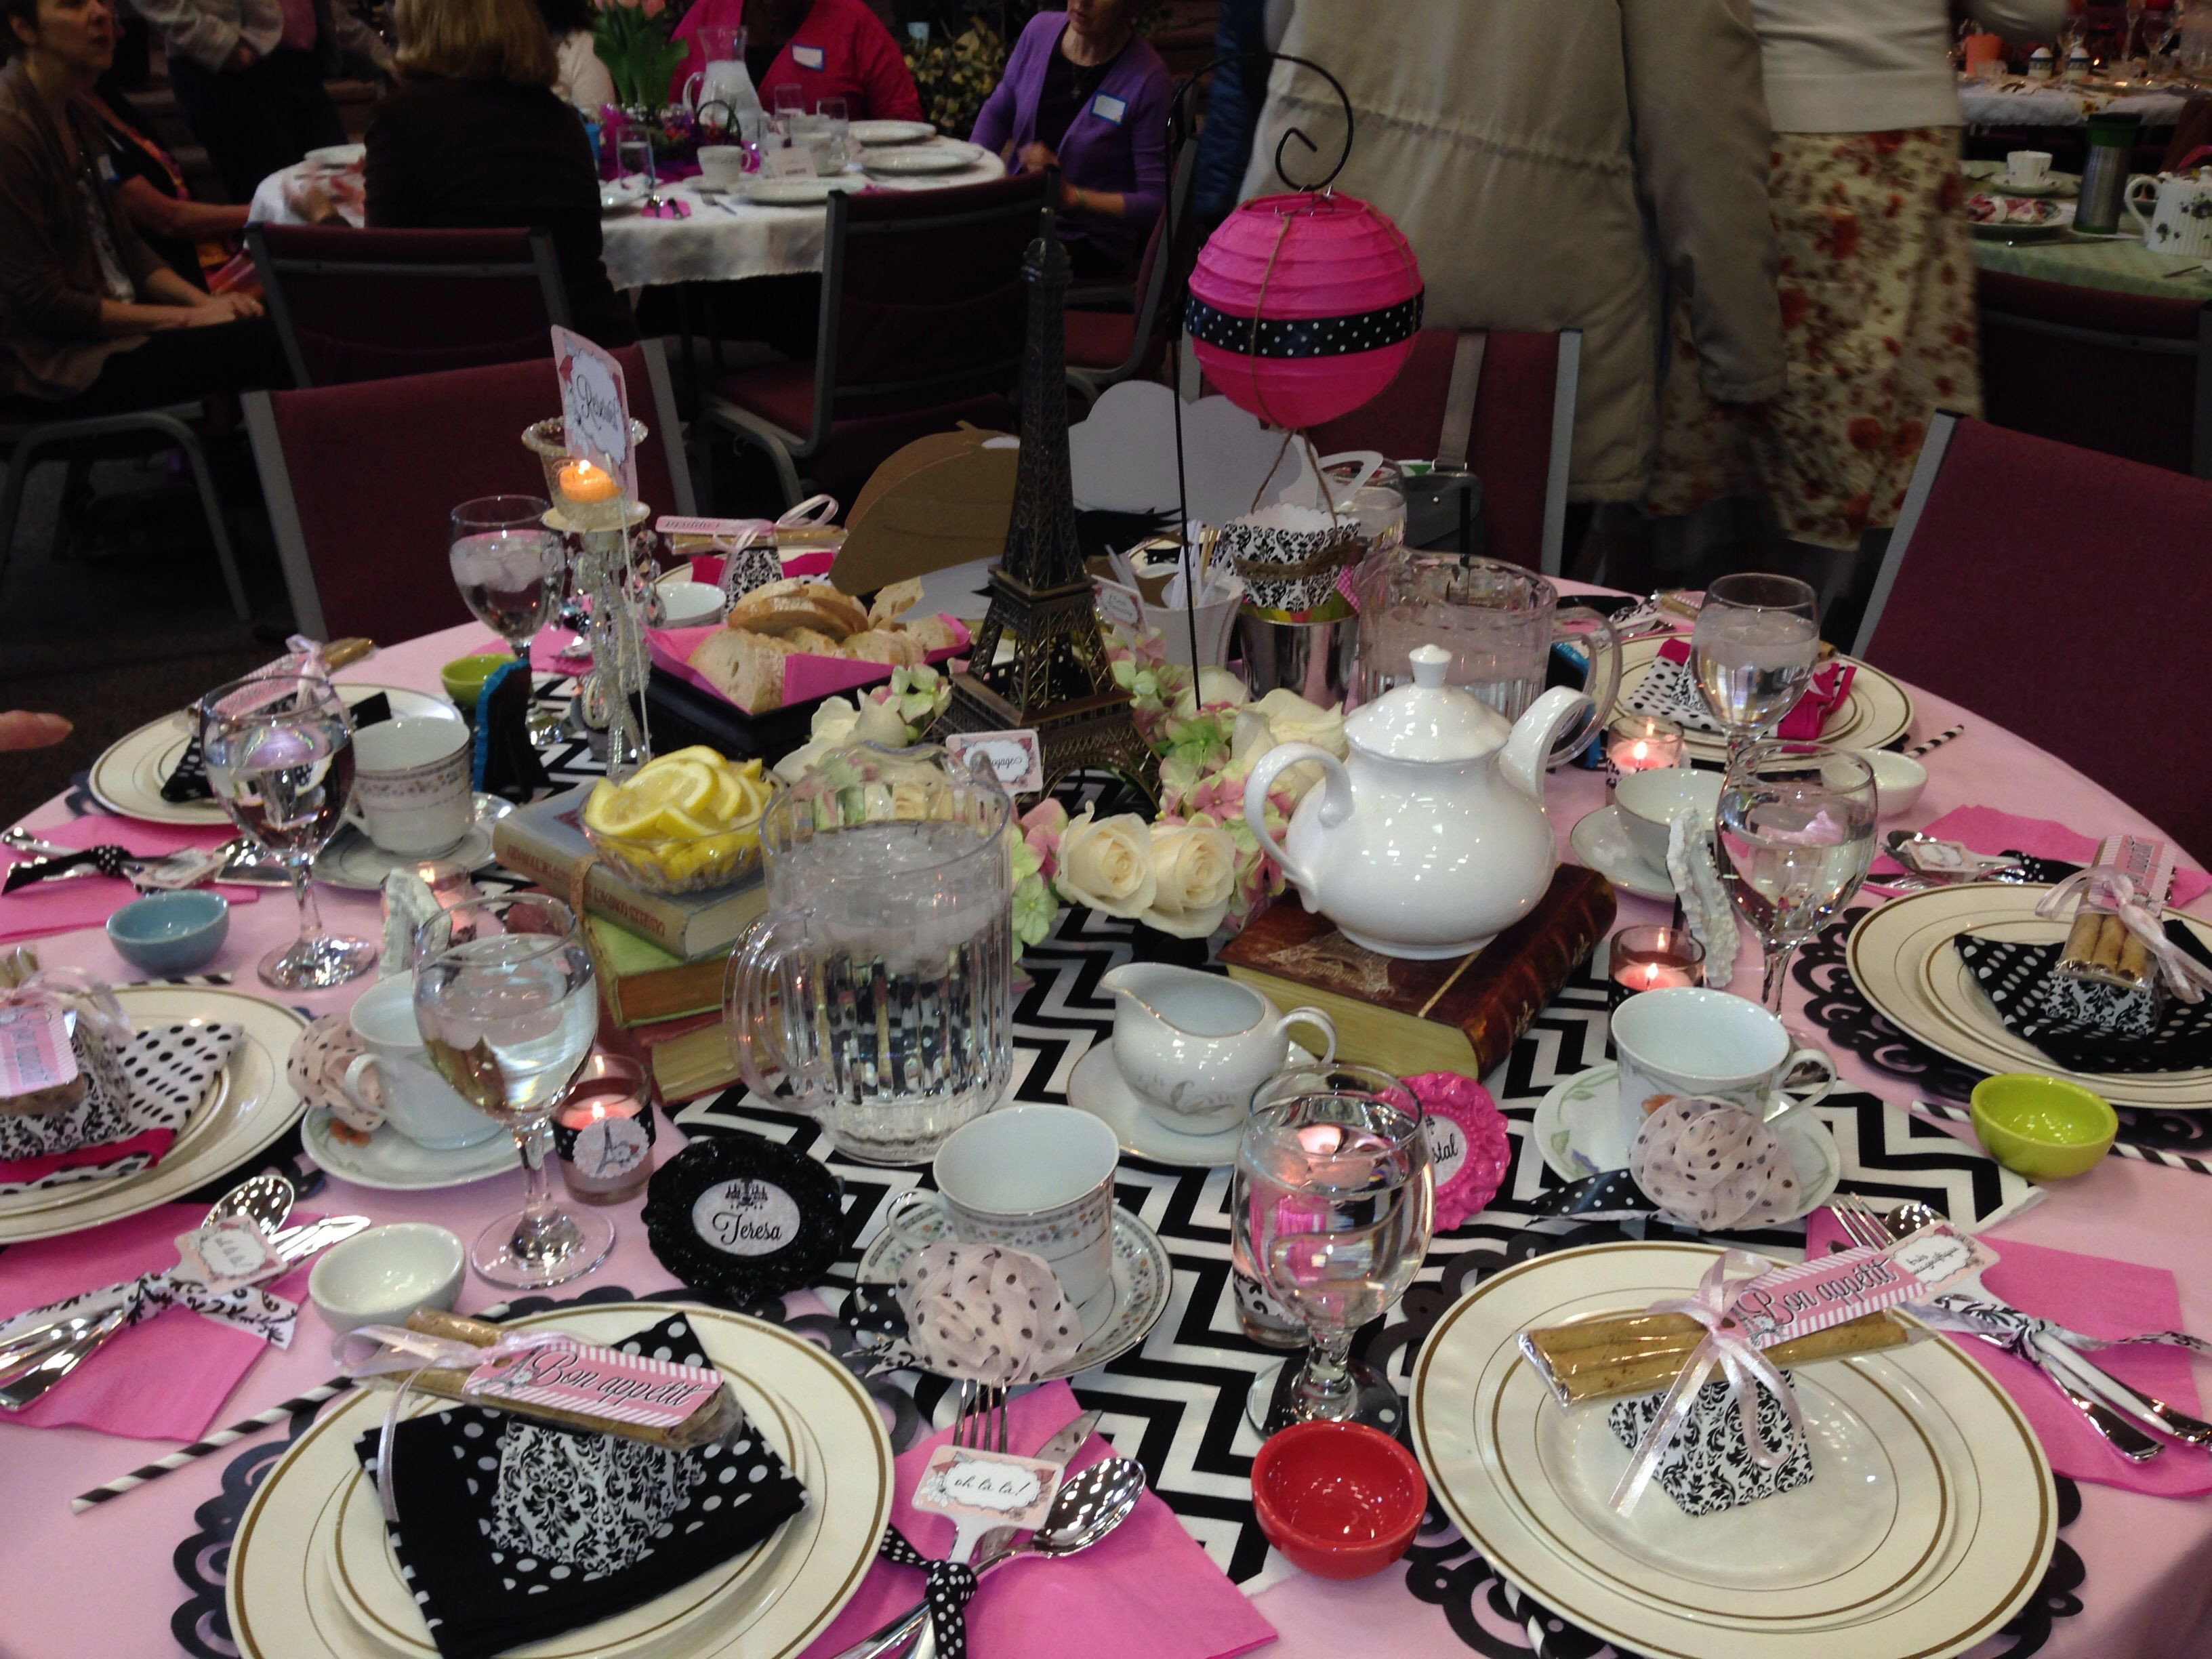 Women'S Ministry Christmas Party Ideas
 Paris themed table for Women s Tea Party event at church